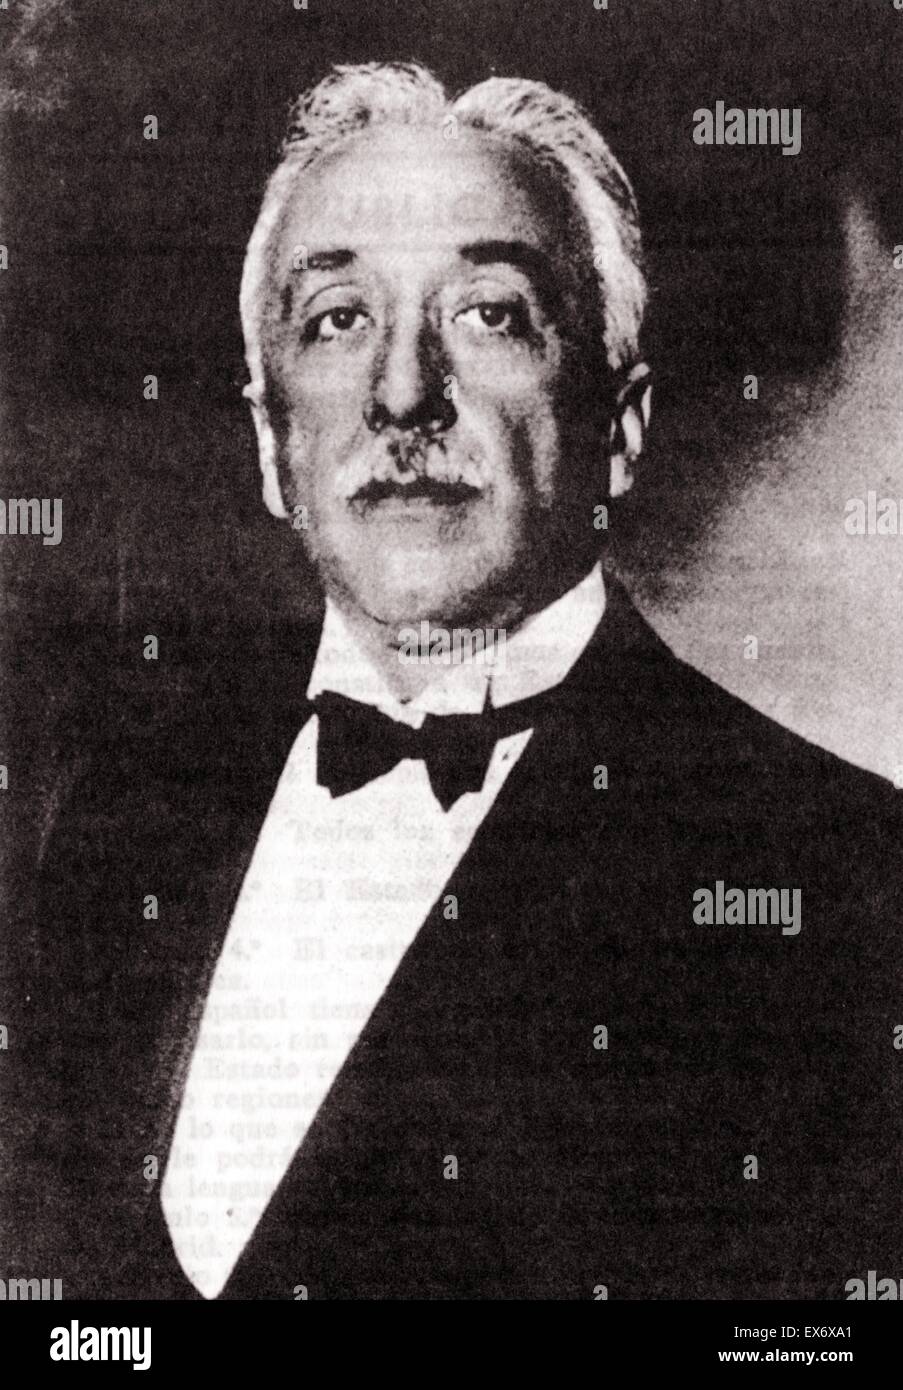 Niceto Alcalá-Zamora y Torres (1877 – 1949) Spanish politician and first prime minister of the Second Spanish Republic. Subsequently President 1931-1936 Stock Photo